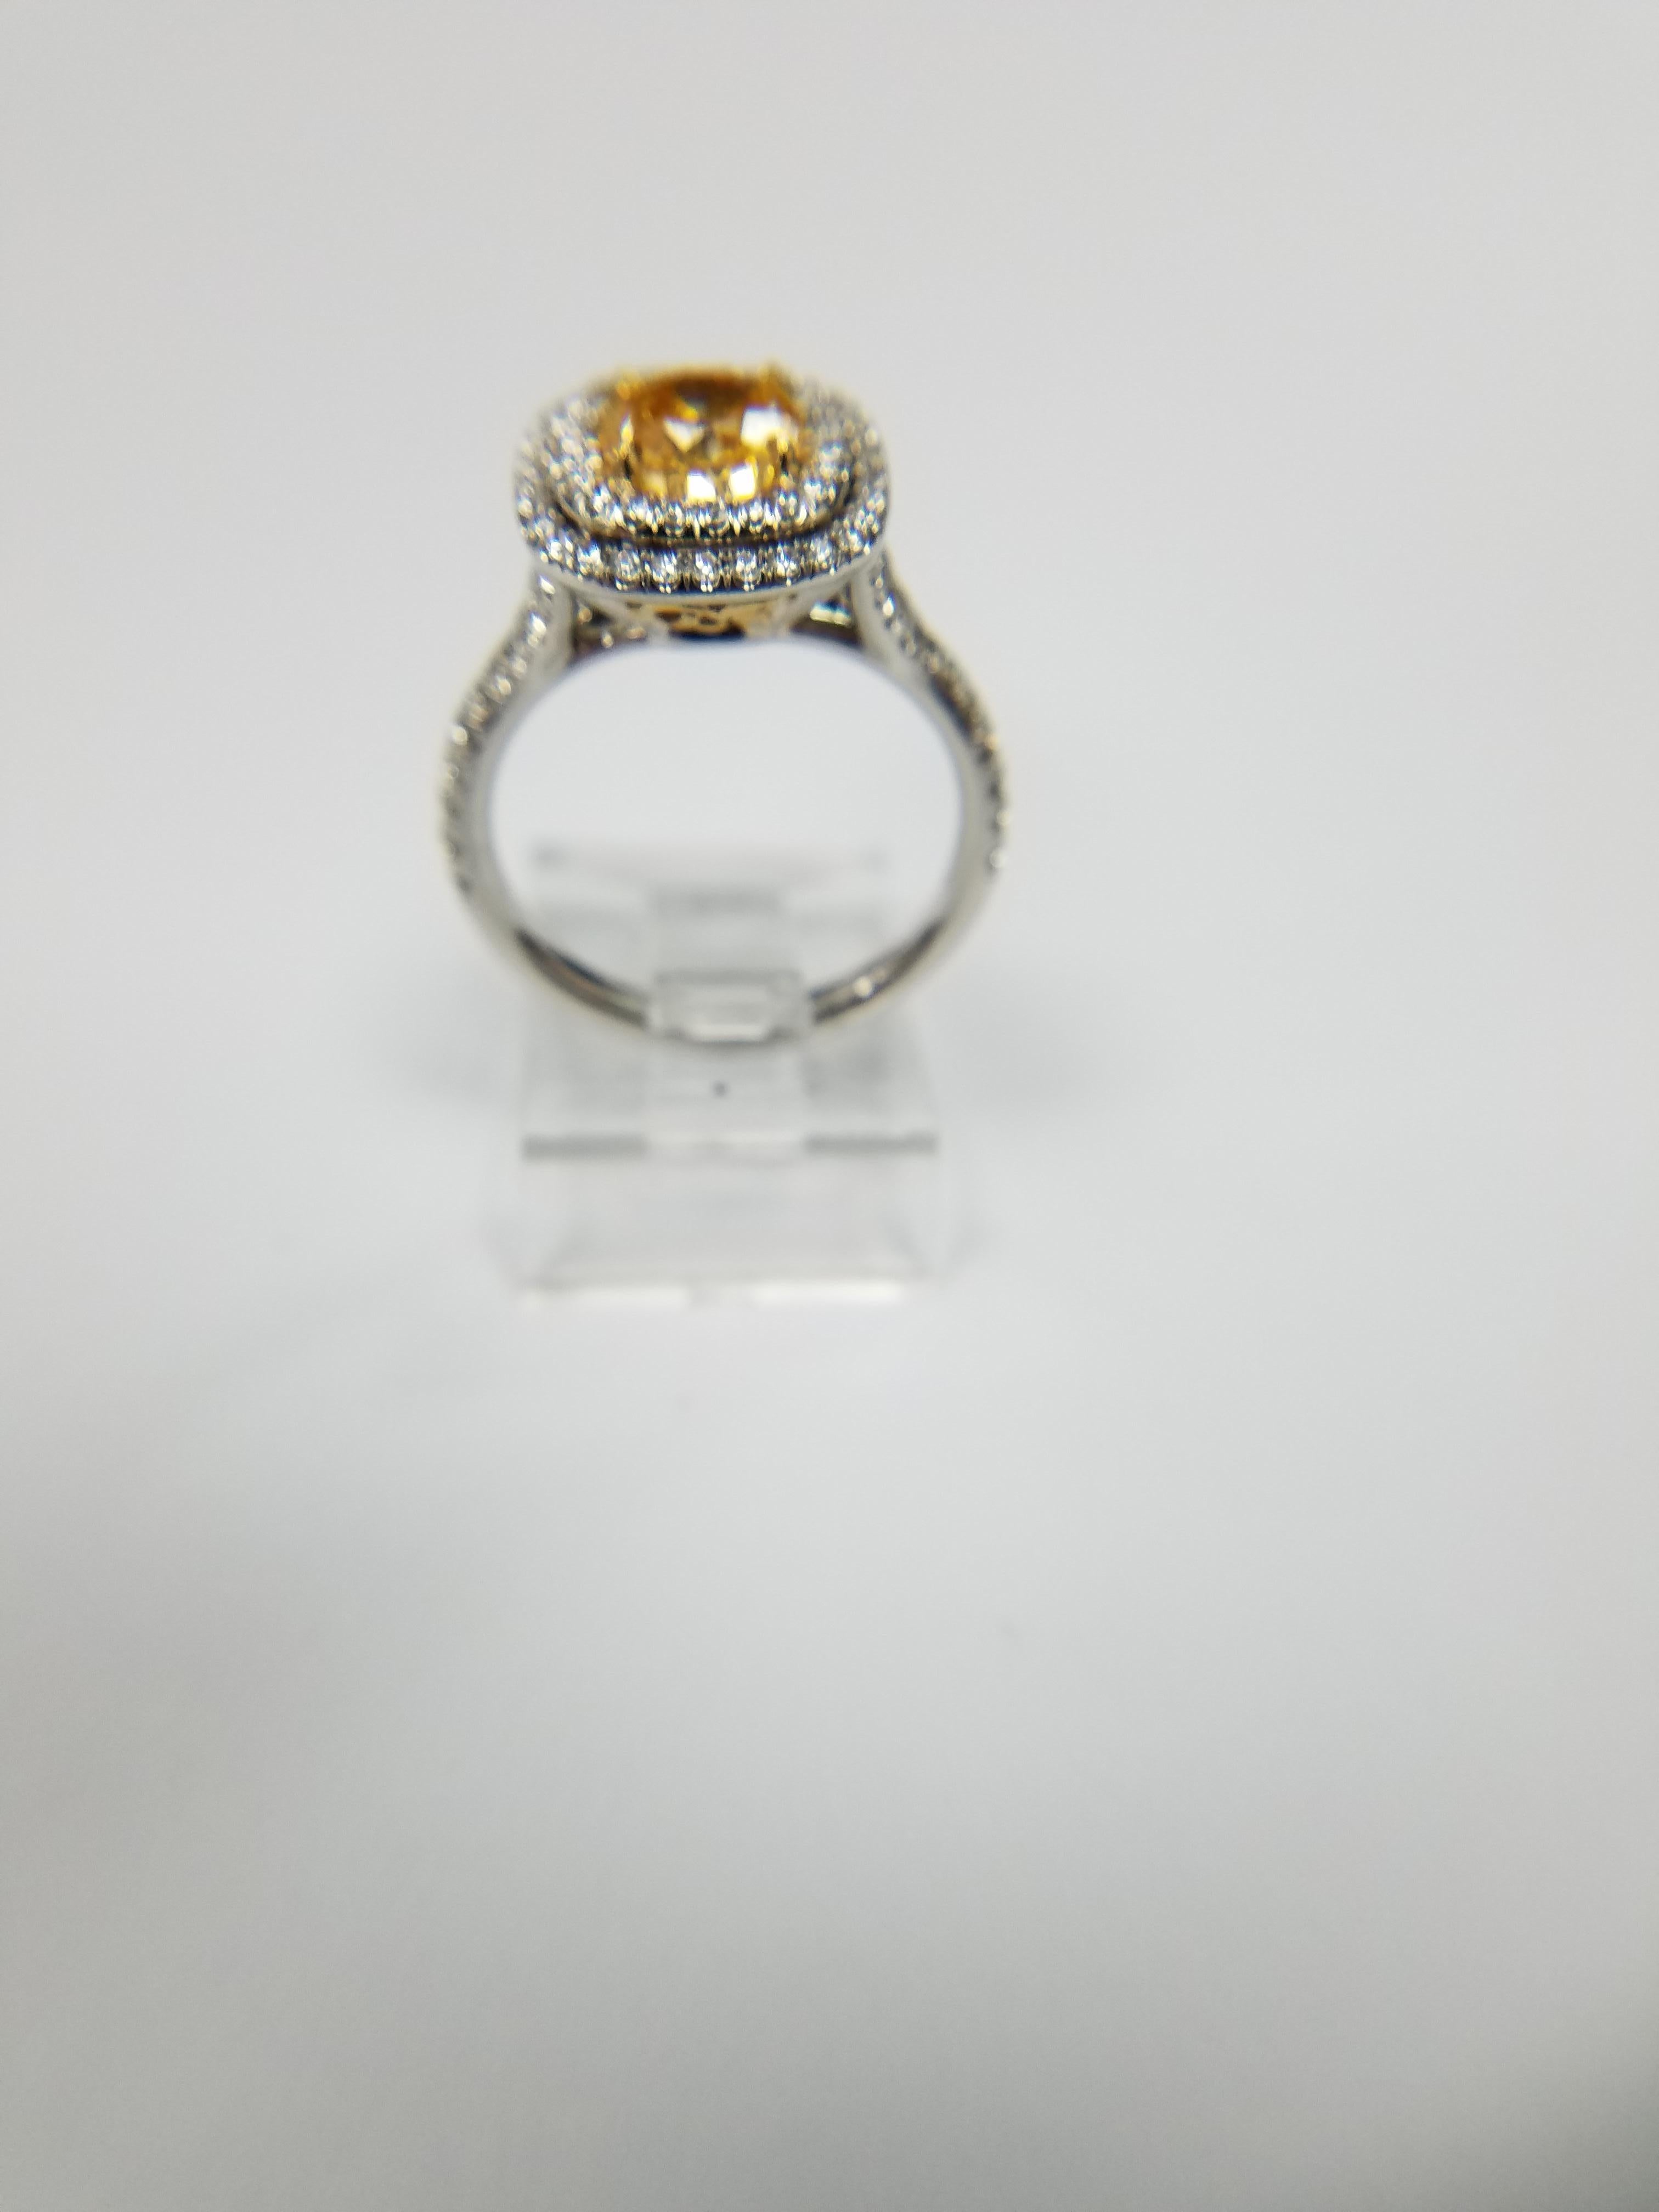 Round Cut GIA Certified 1.02 Carat Diamond Natural Fancy Intense Yellow Orange Color Ring For Sale